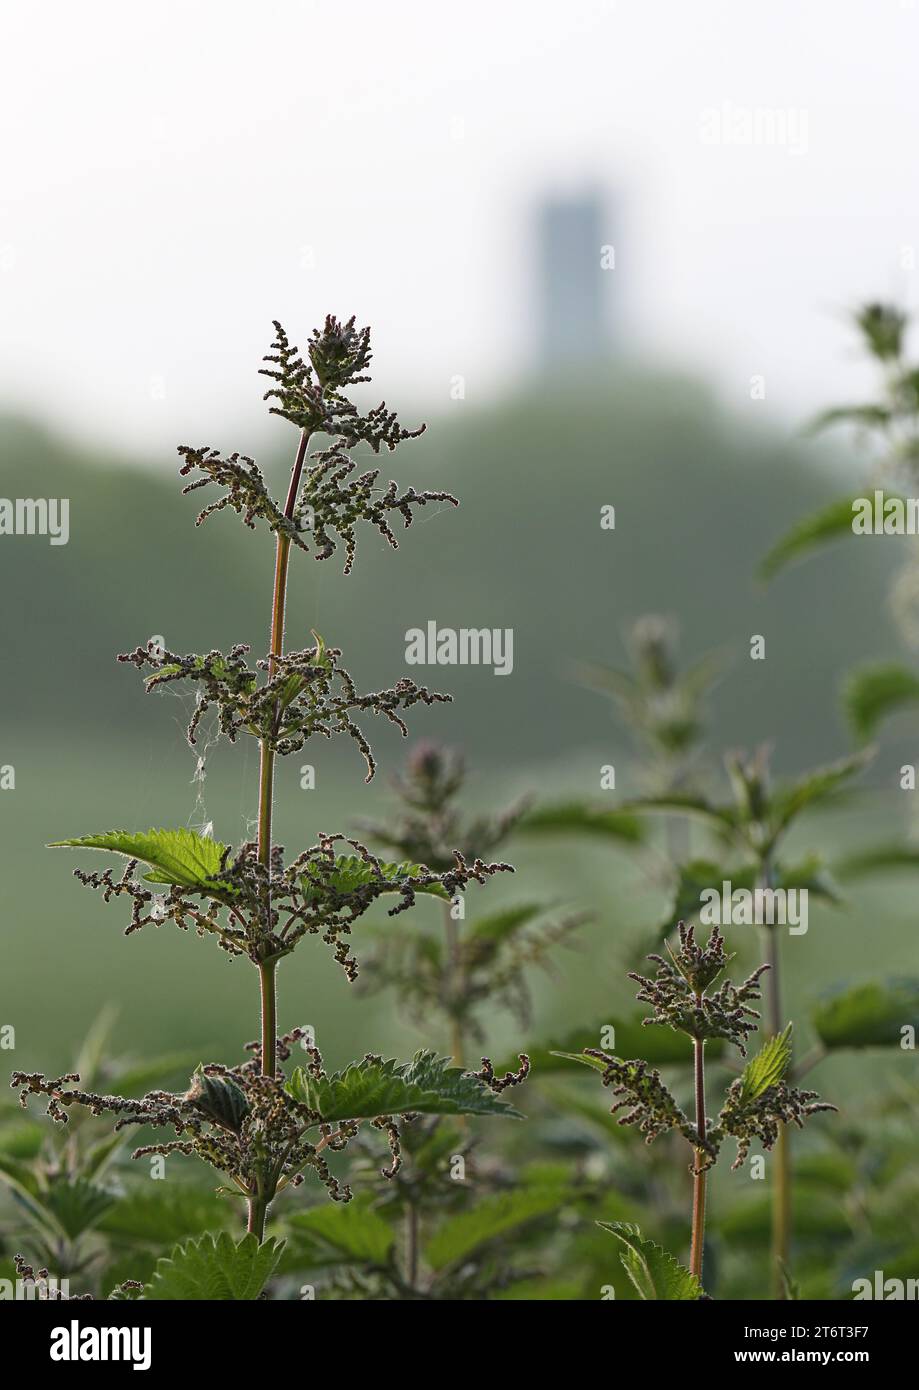 nettle plant with out of focus church on a hill in the background Stock Photo